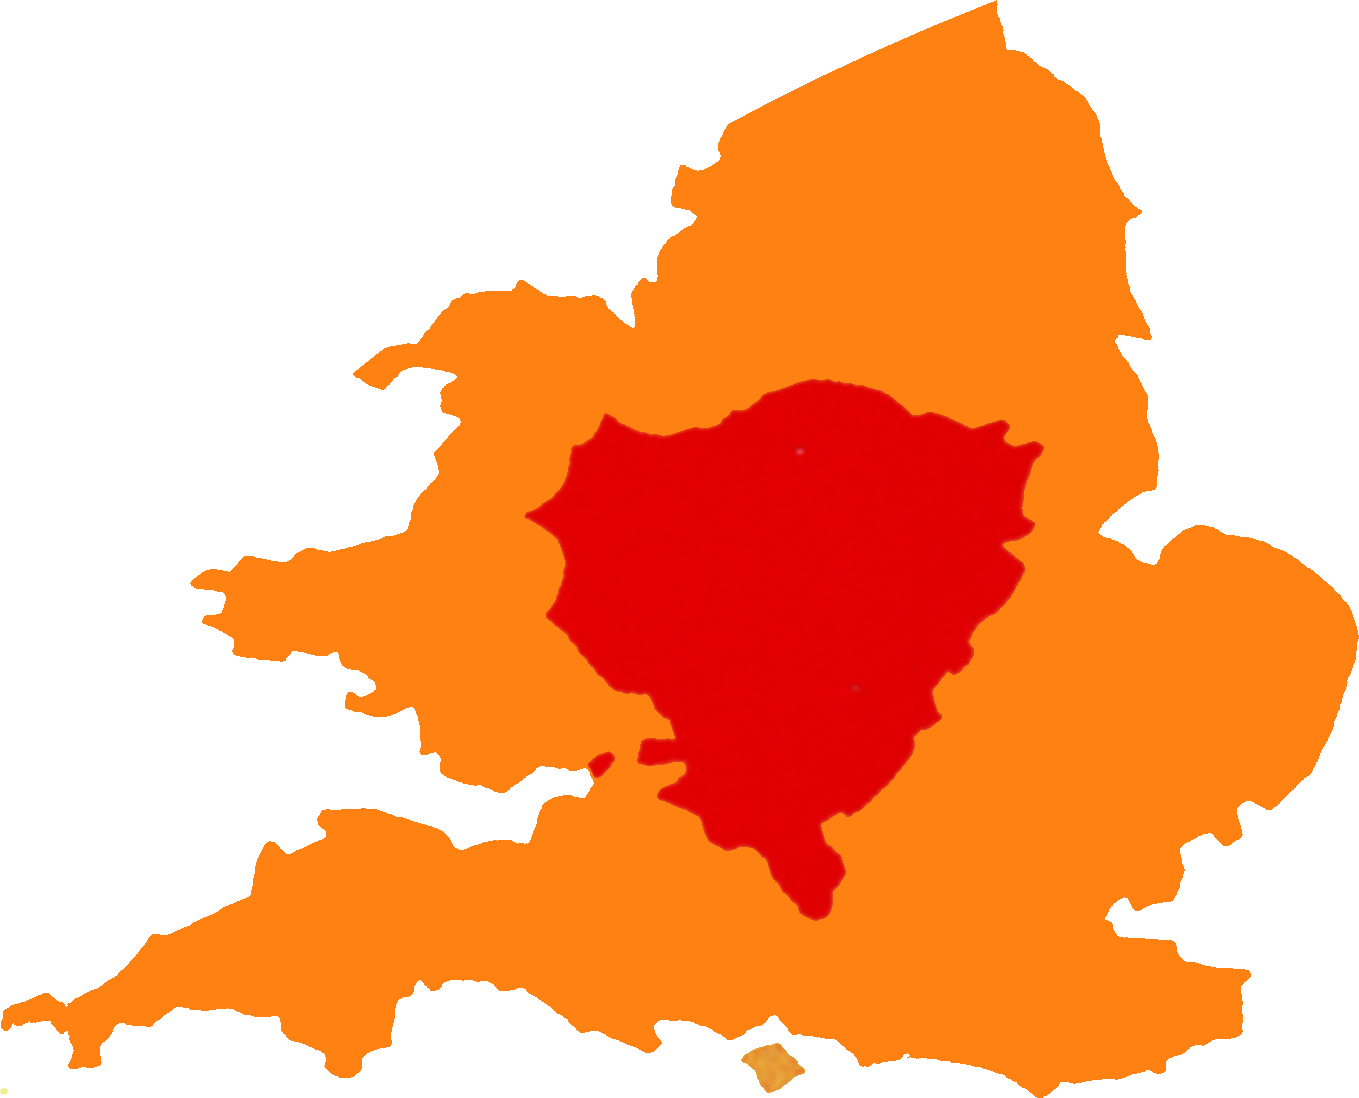 Small map of the region within the UK